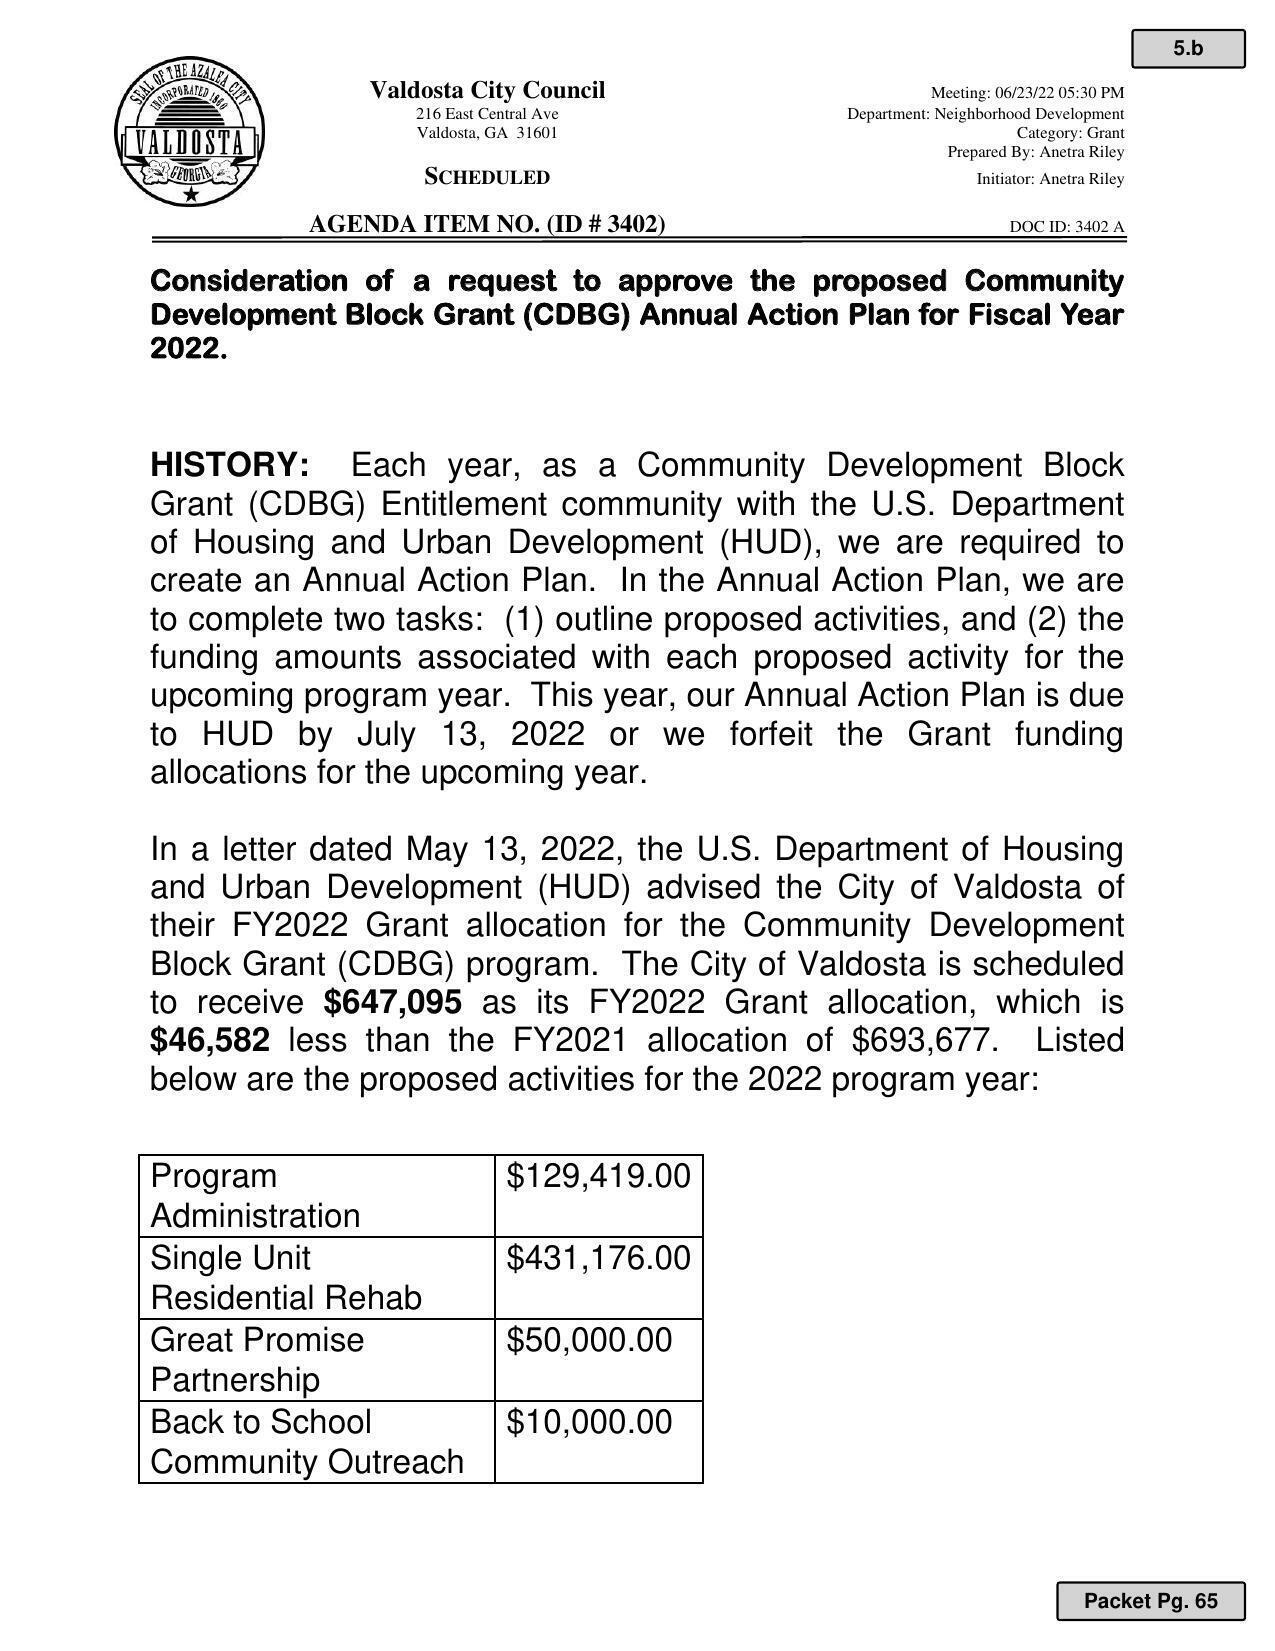 approve the proposed Community Development Block Grant (CDBG) Annual Action Plan for Fiscal Year 2022.